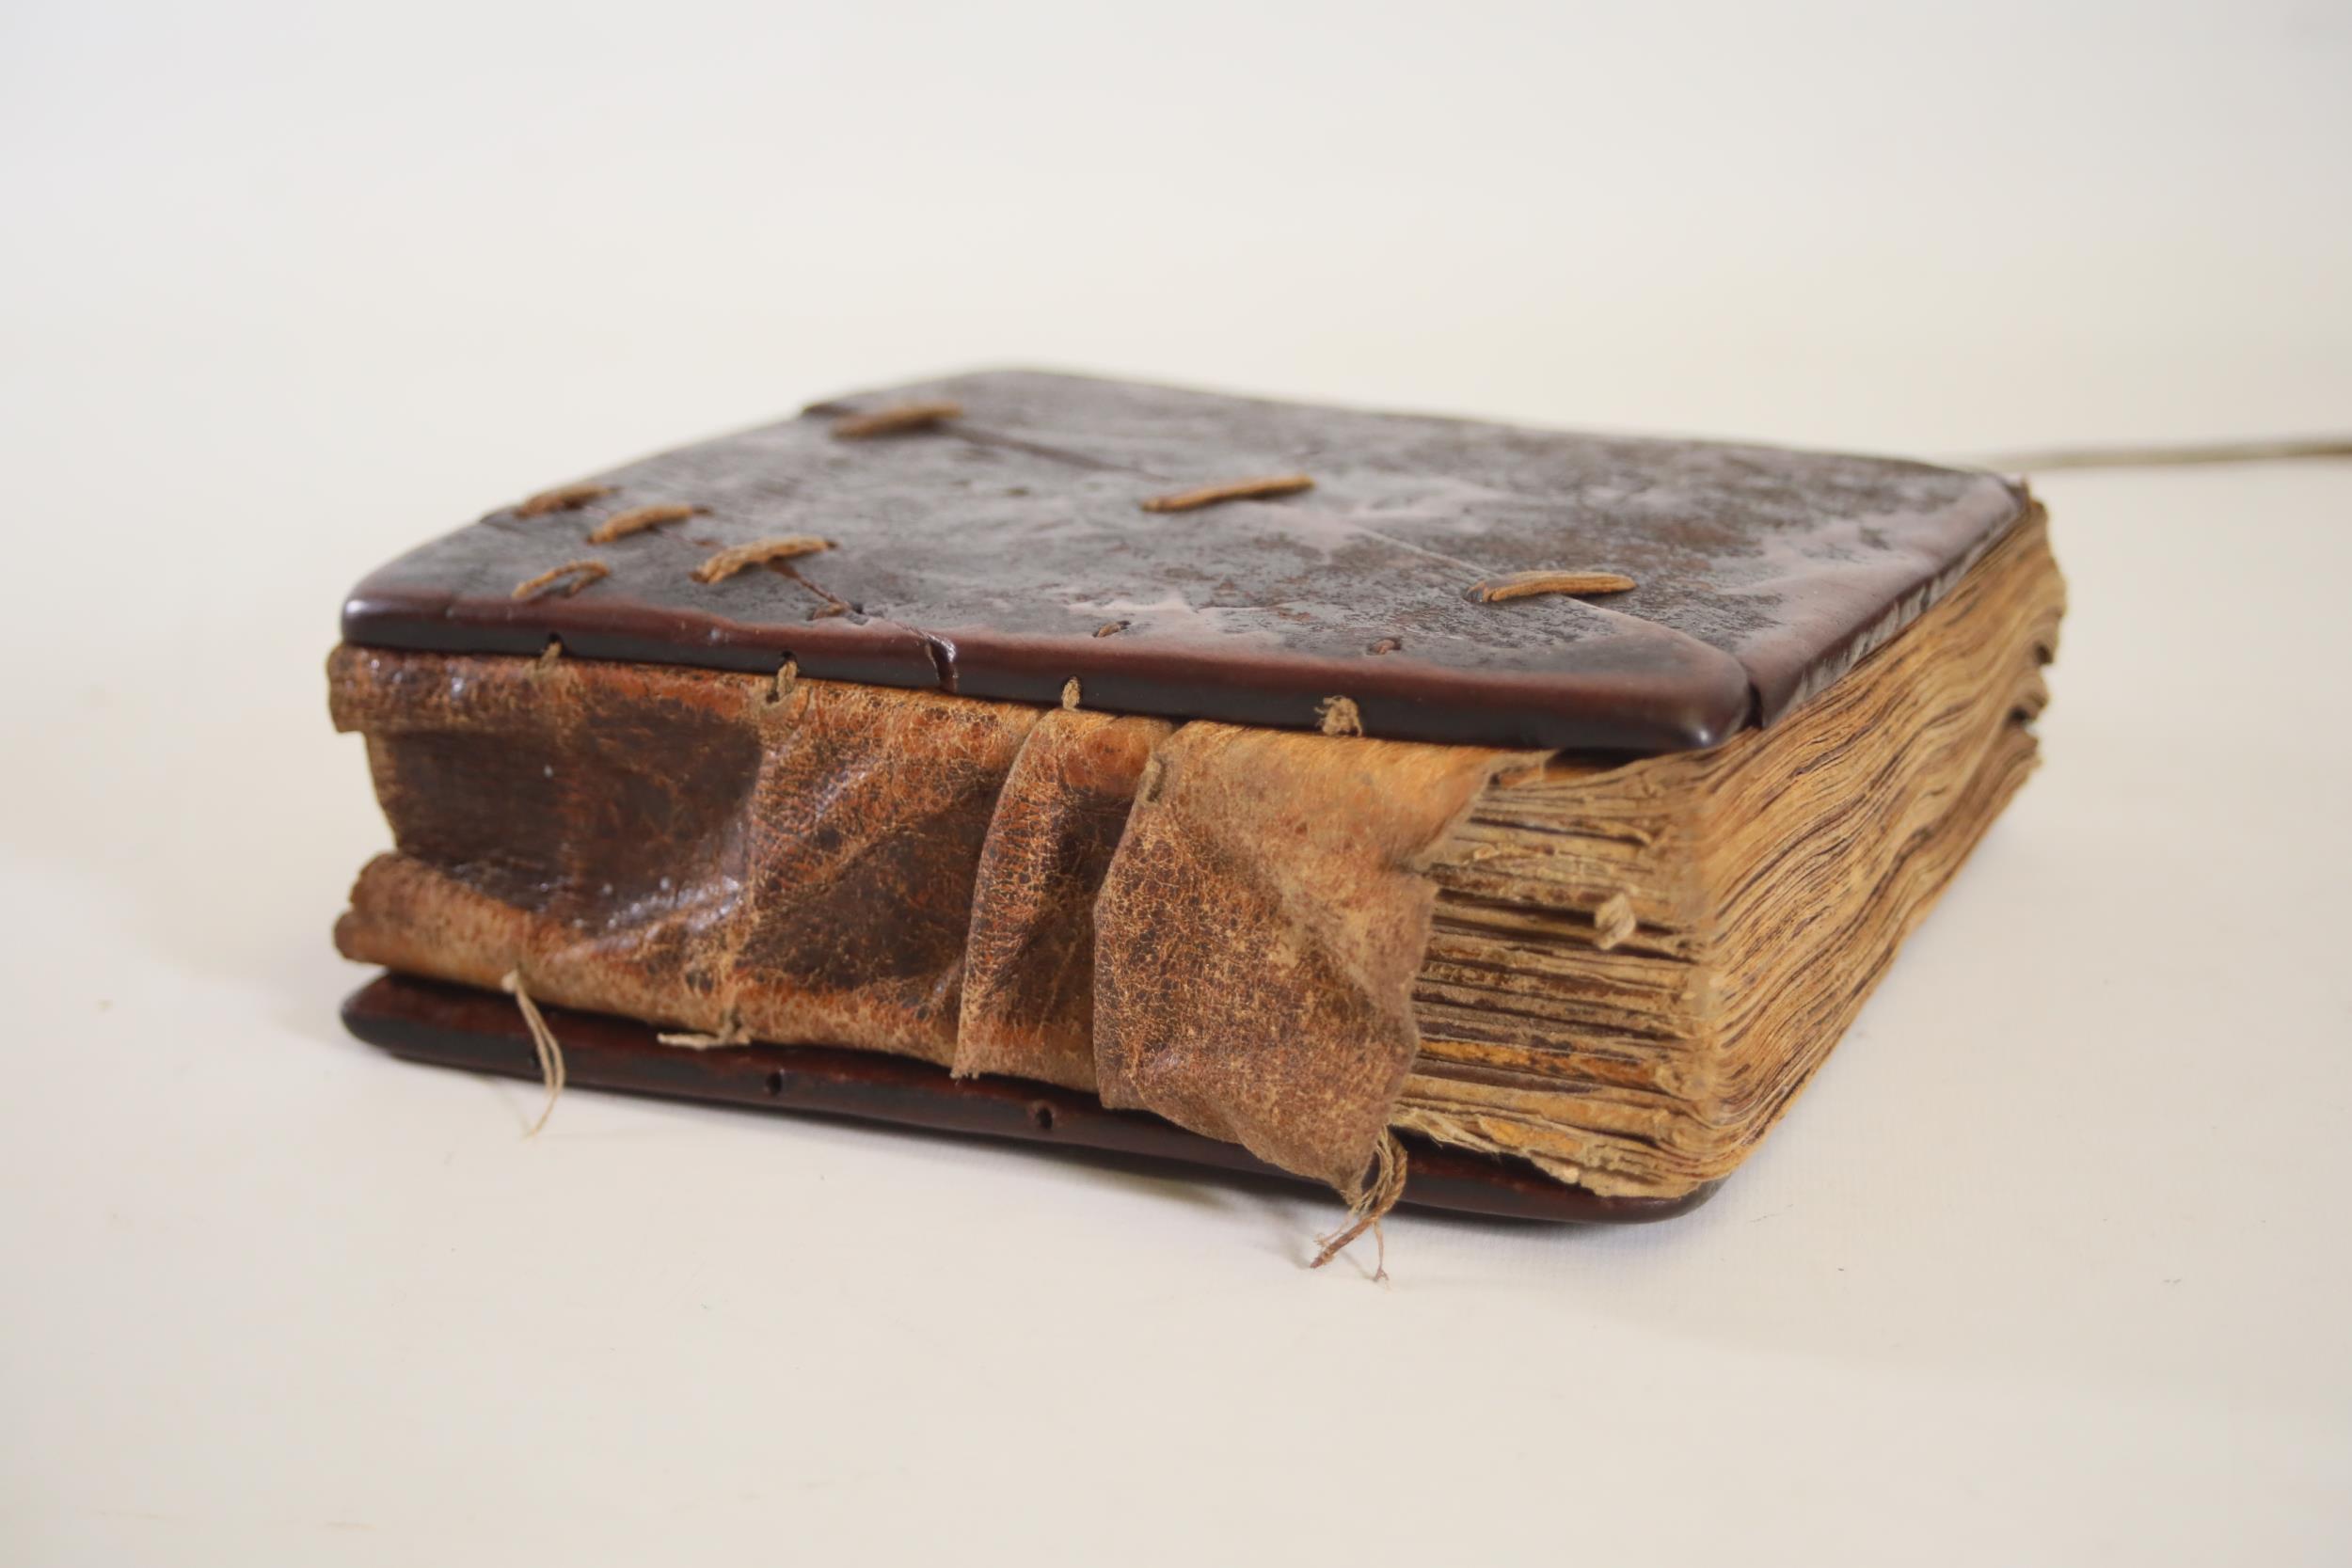 Ancient Leather Encased Bible with Vellum - Image 9 of 19